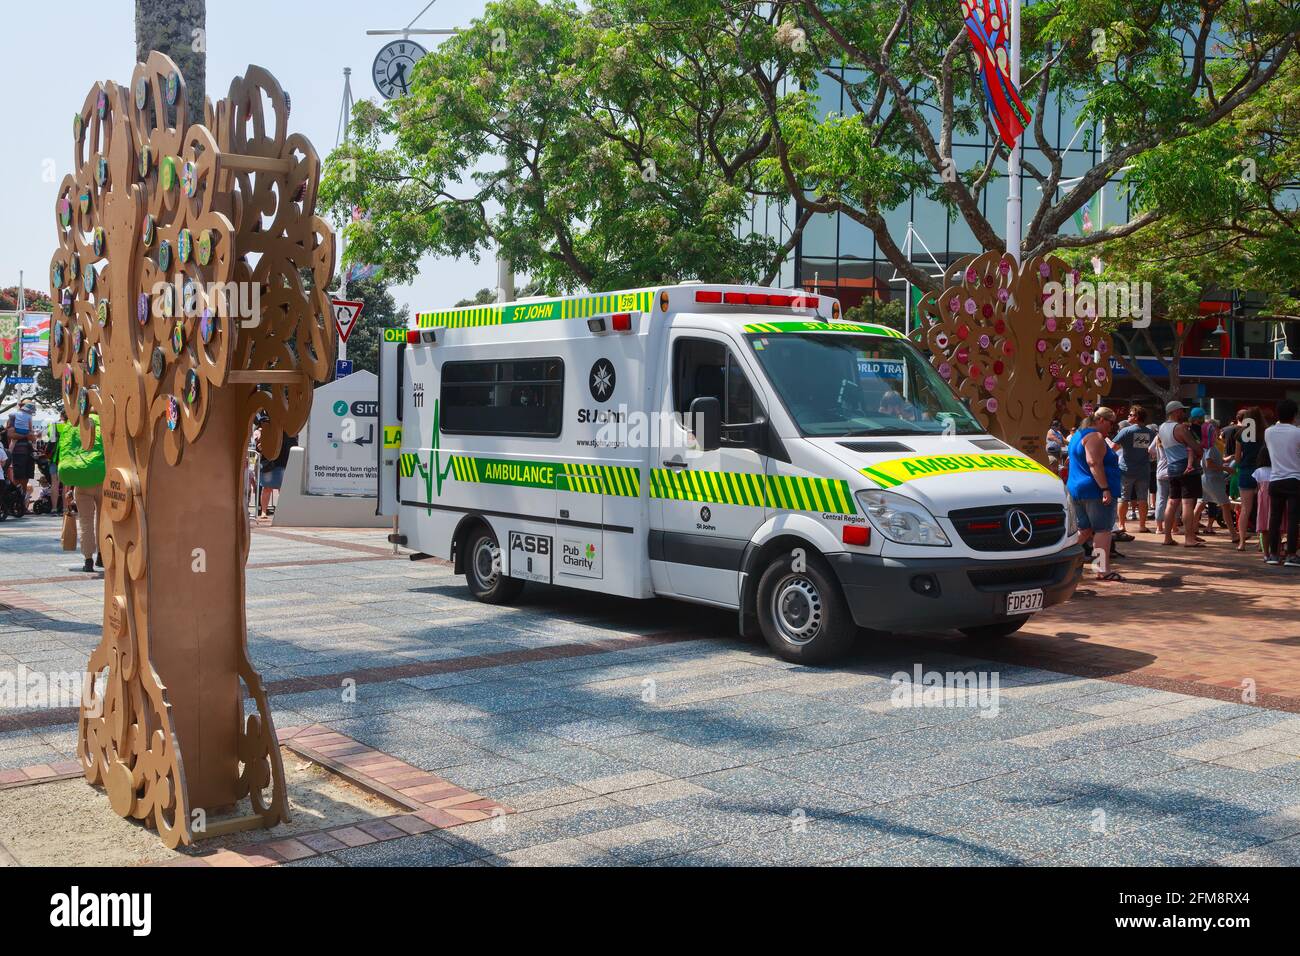 An ambulance owned by St John New Zealand standing by in downtown Tauranga, NZ, during a Christmas parade Stock Photo